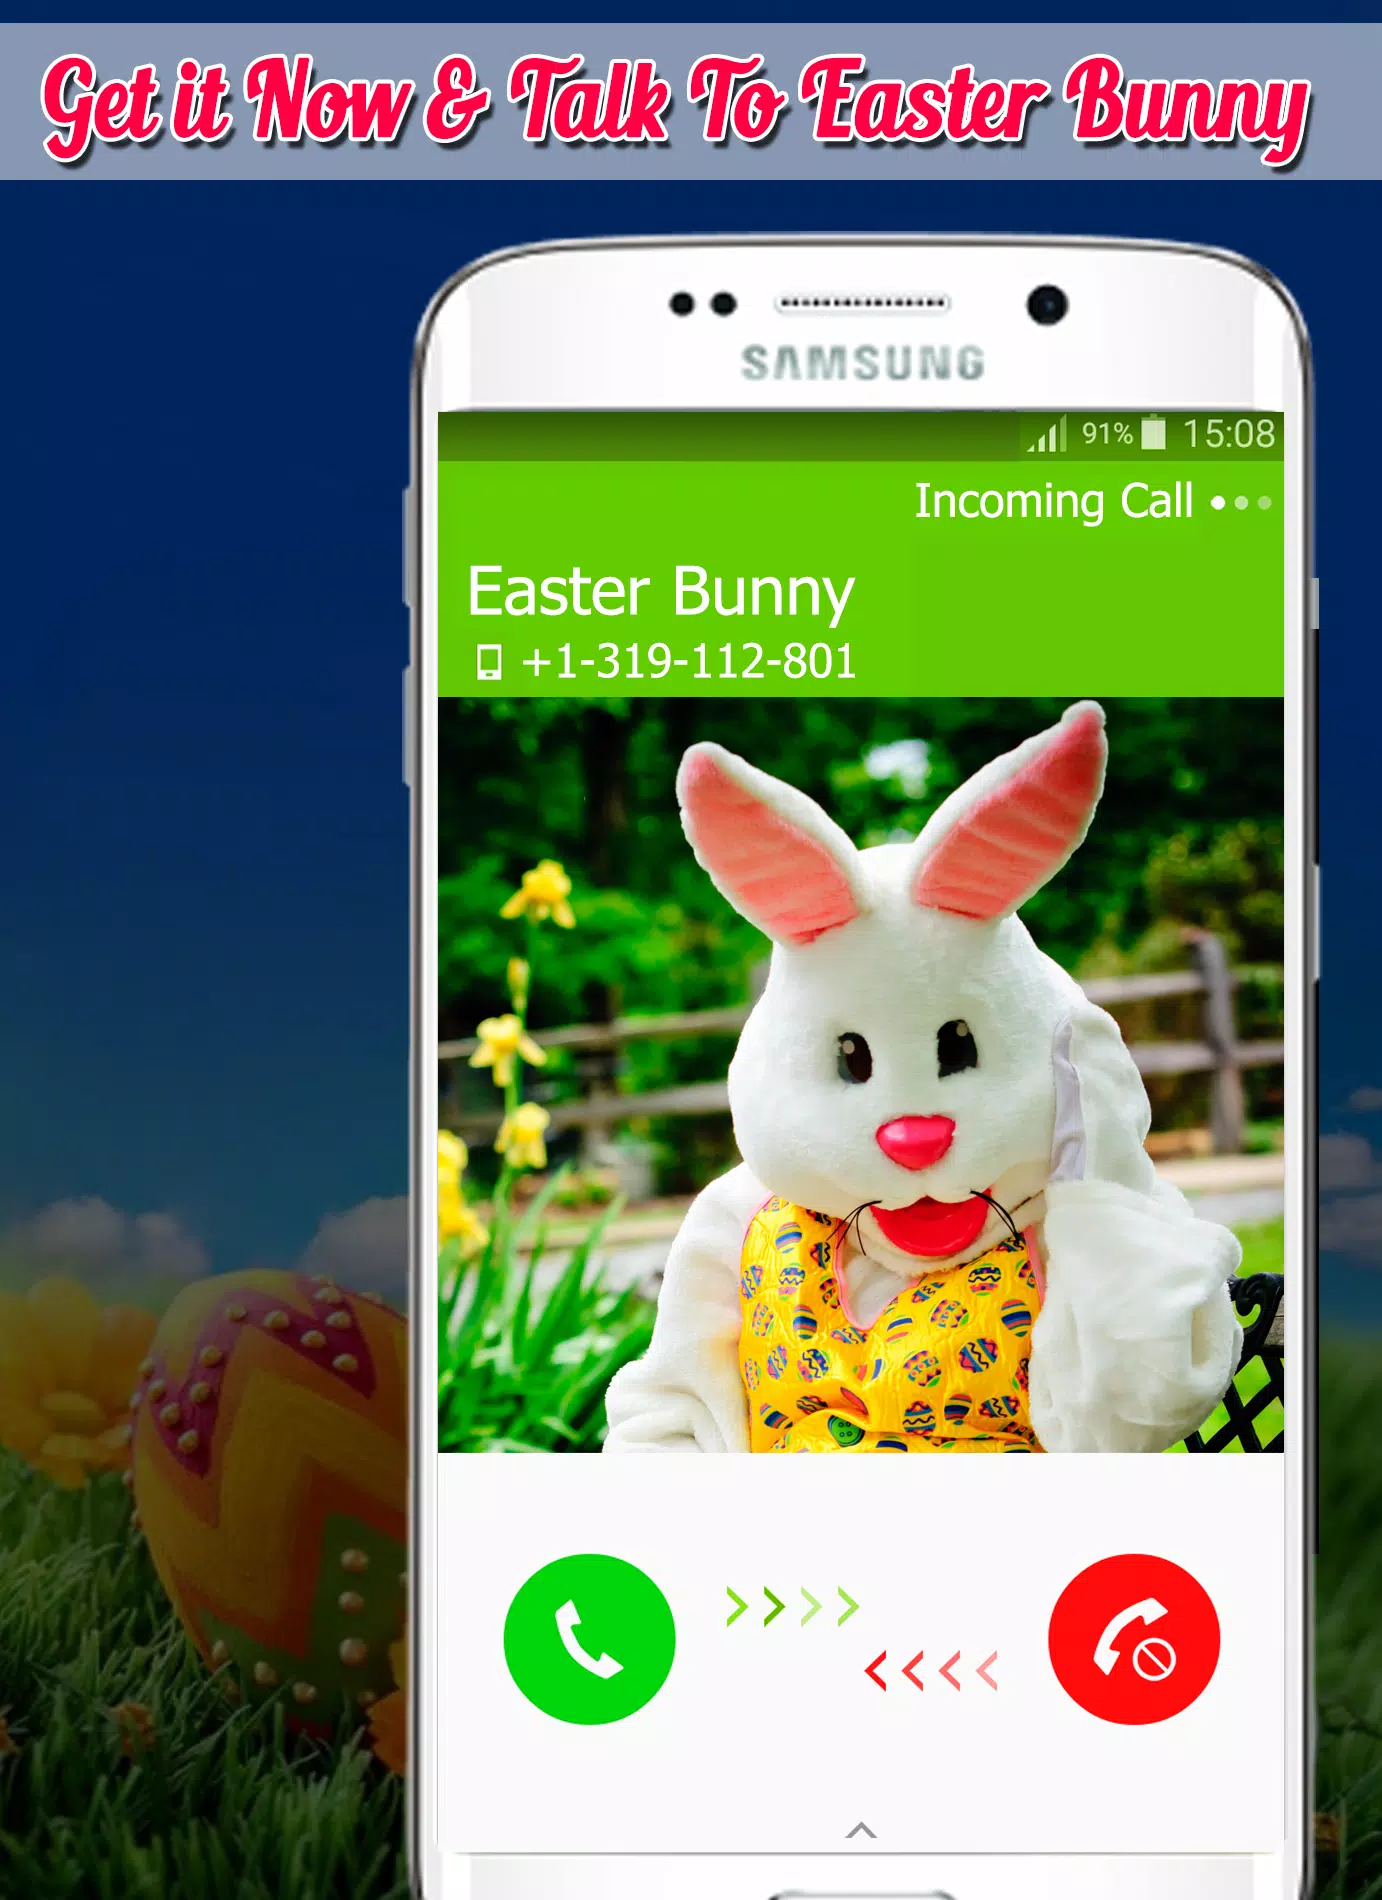 Make a Call to the Easter Bunny